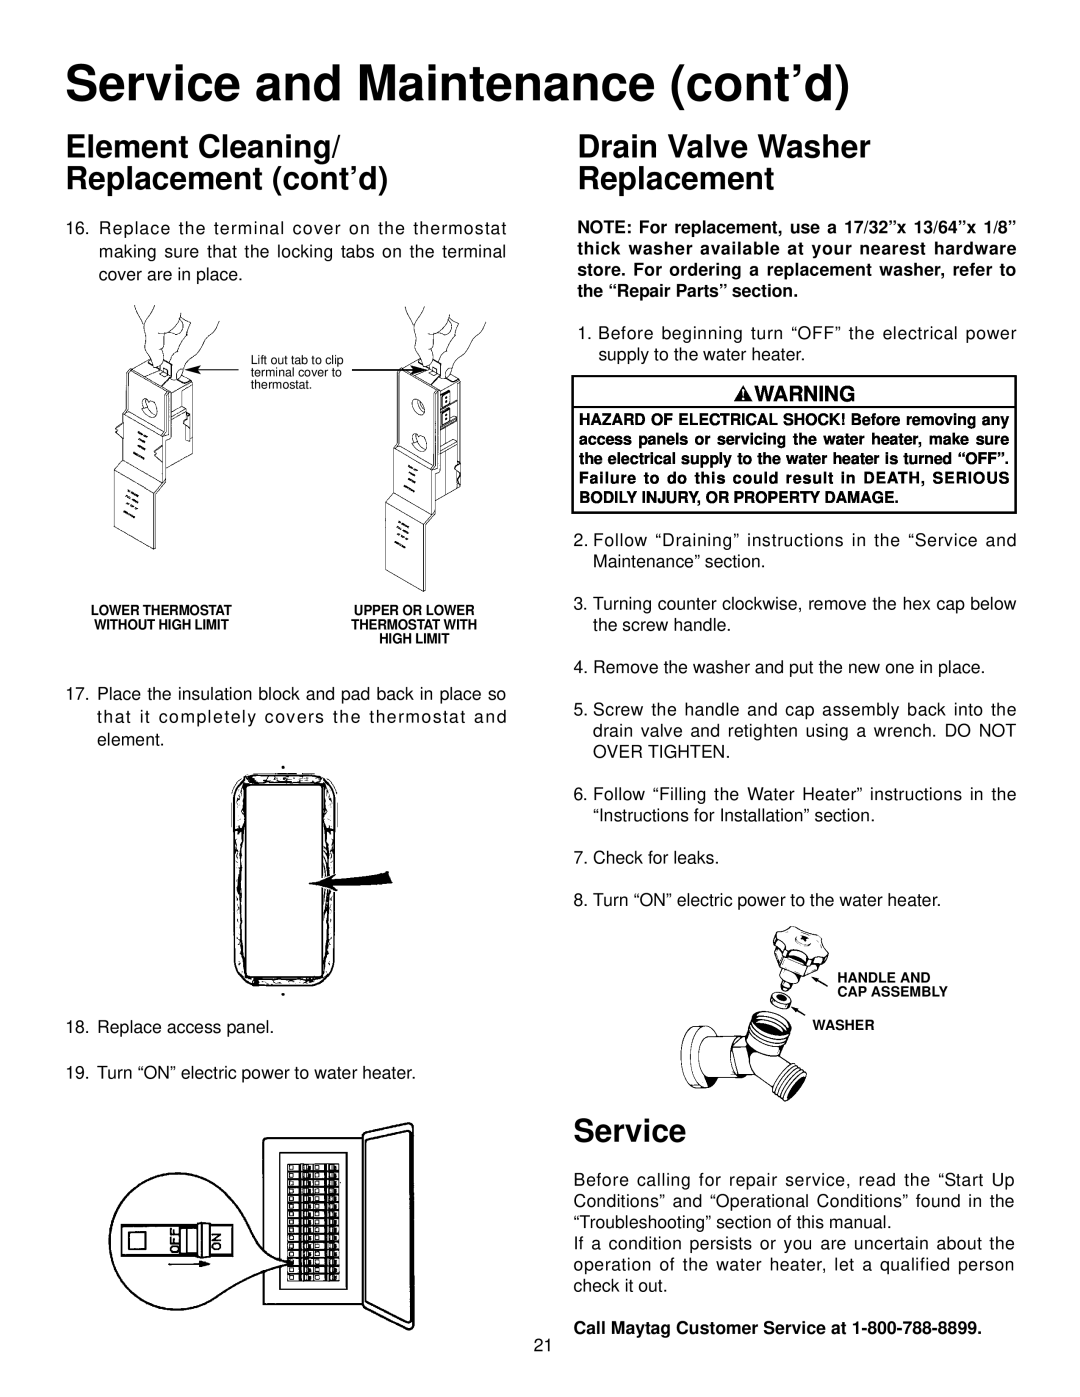 Maytag HR630SJRT, HR652SJRT, HR682SJRT manual Element Cleaning Replacement cont’d, Drain Valve Washer Replacement, Service 